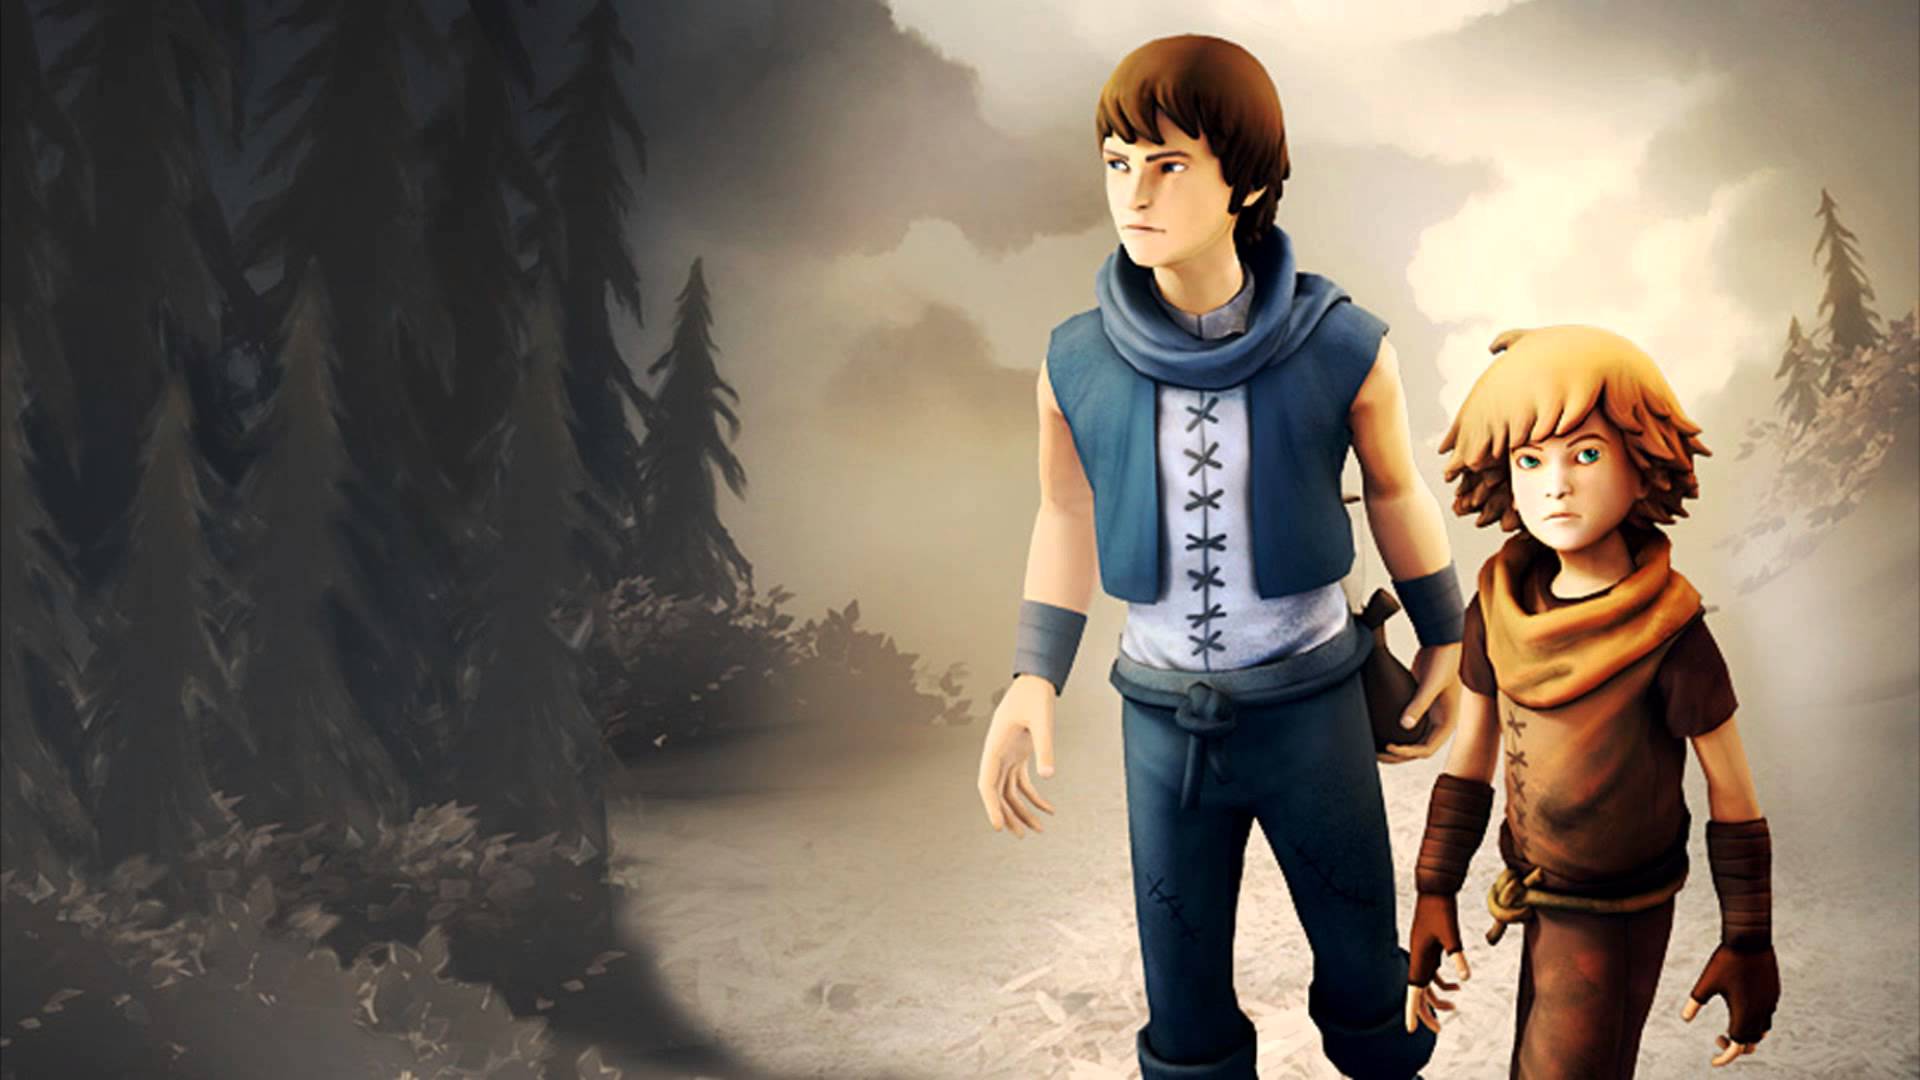 Bros Before Woes: A Tale of Two Sons Xbox One Review